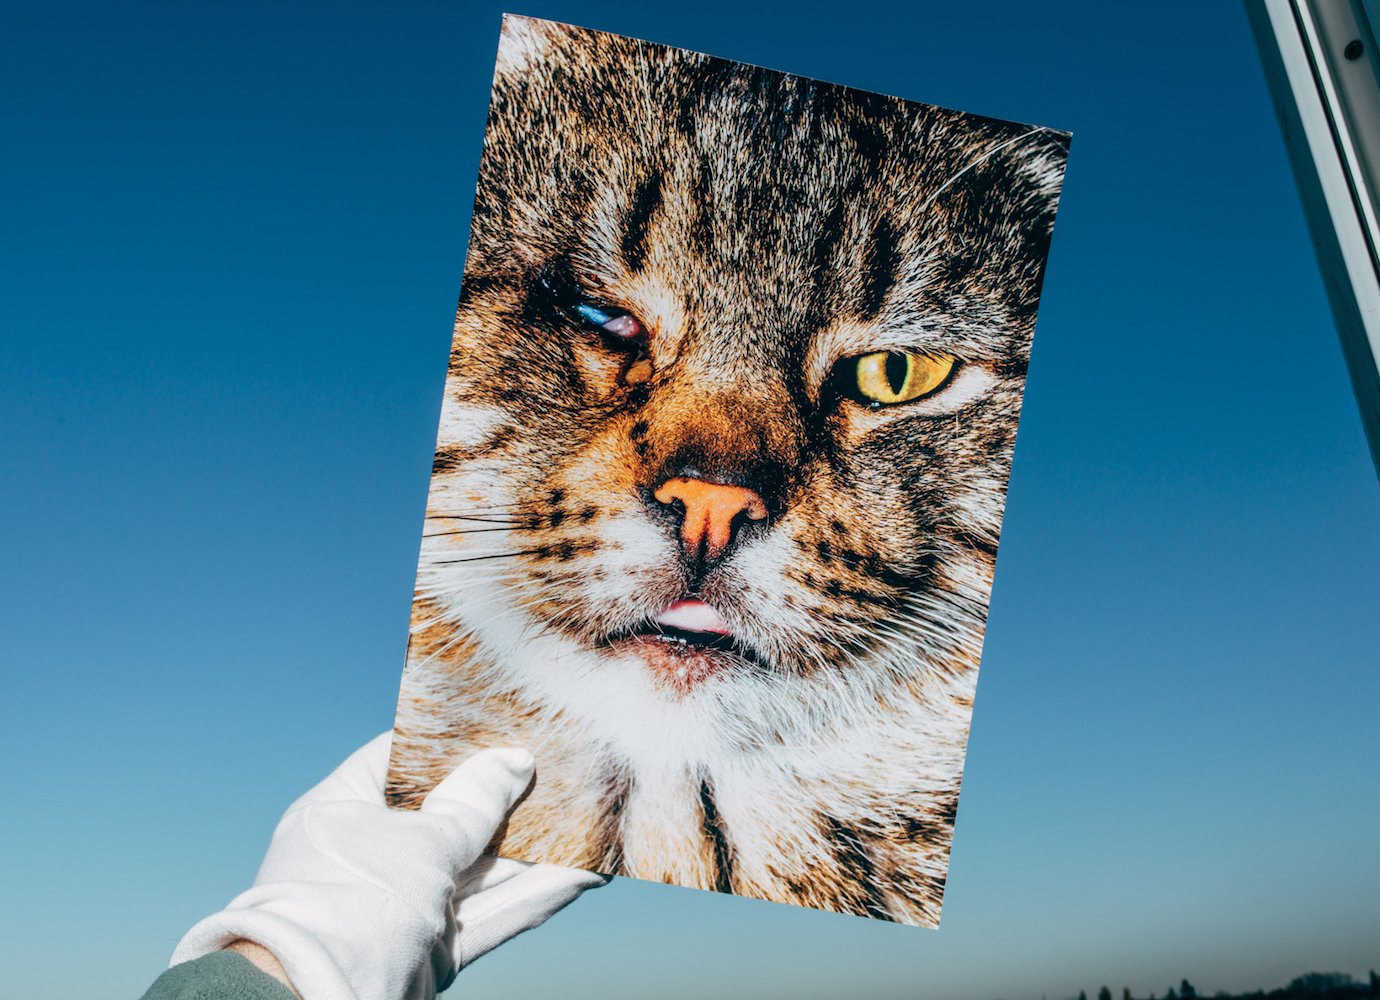 This zine shows the struggles of street cats by turning strays into cover stars